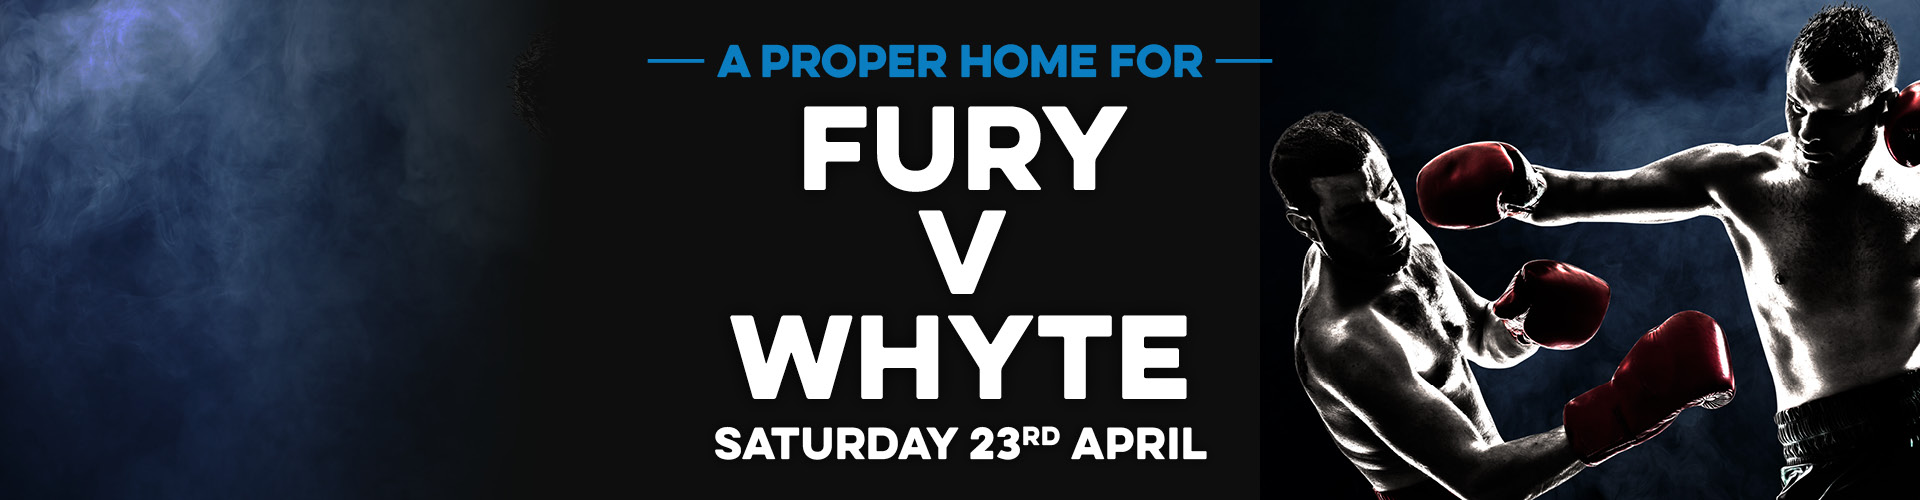 Watch Fury vs Whyte live in Portsmouth